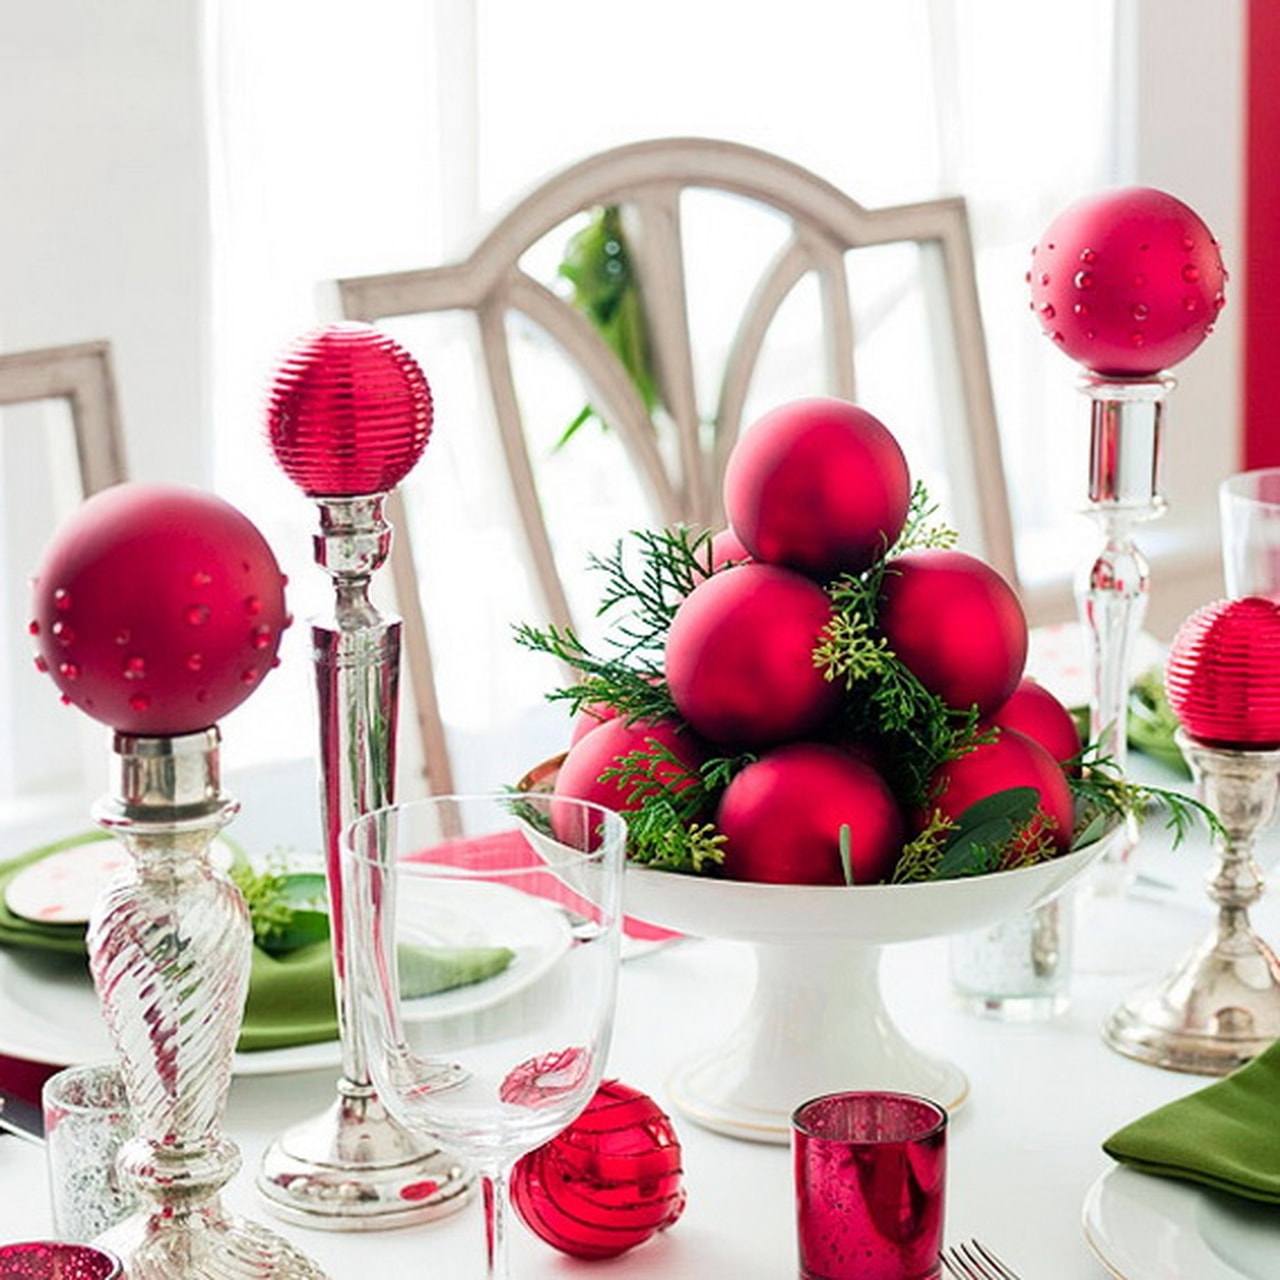 Christmas Entryway Table Decorating Ideas